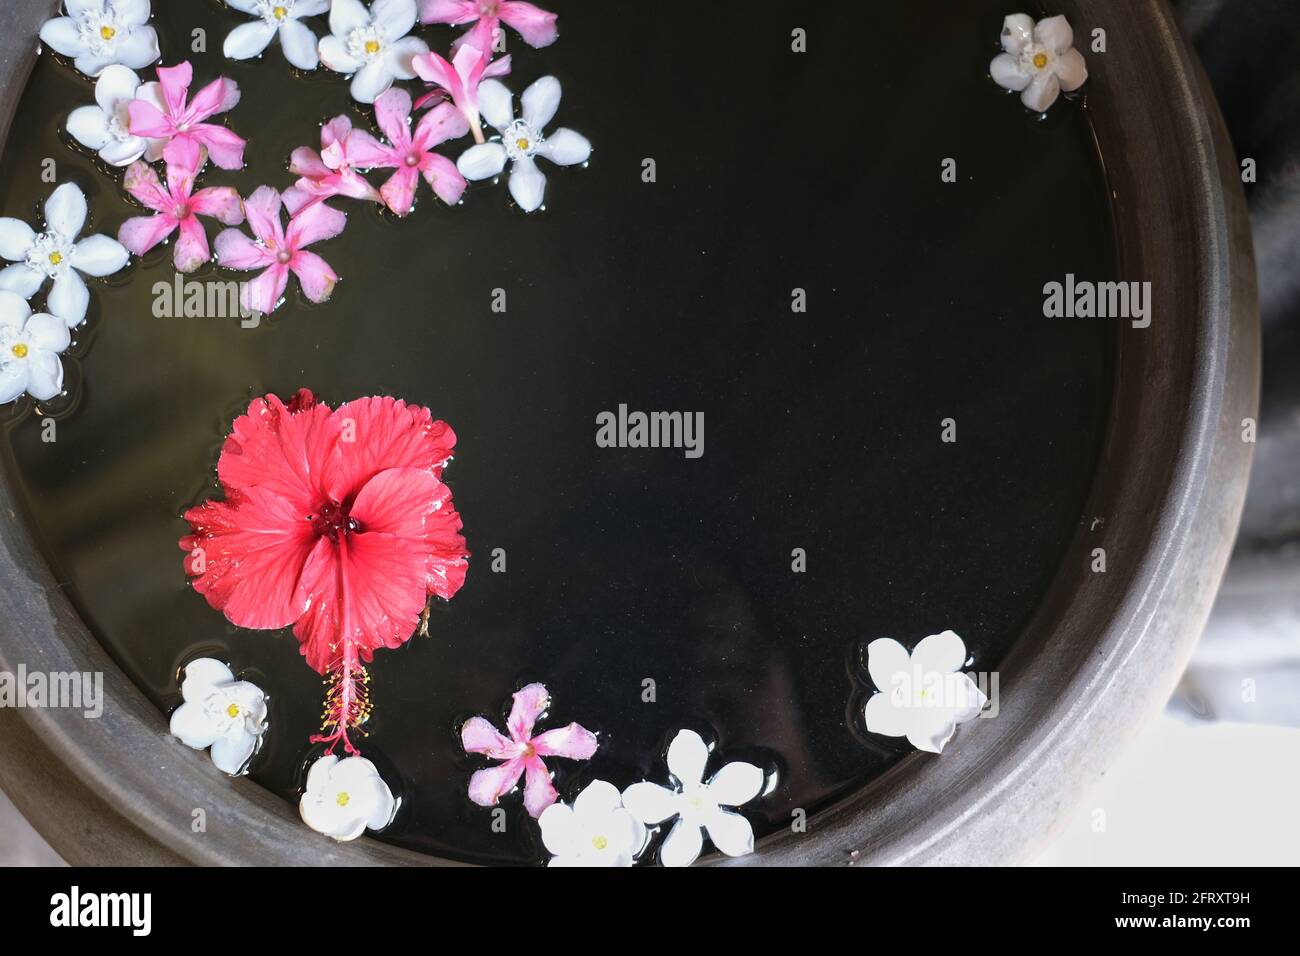 A large clay pot full of fresh water and colorful falling flower petals. Stock Photo